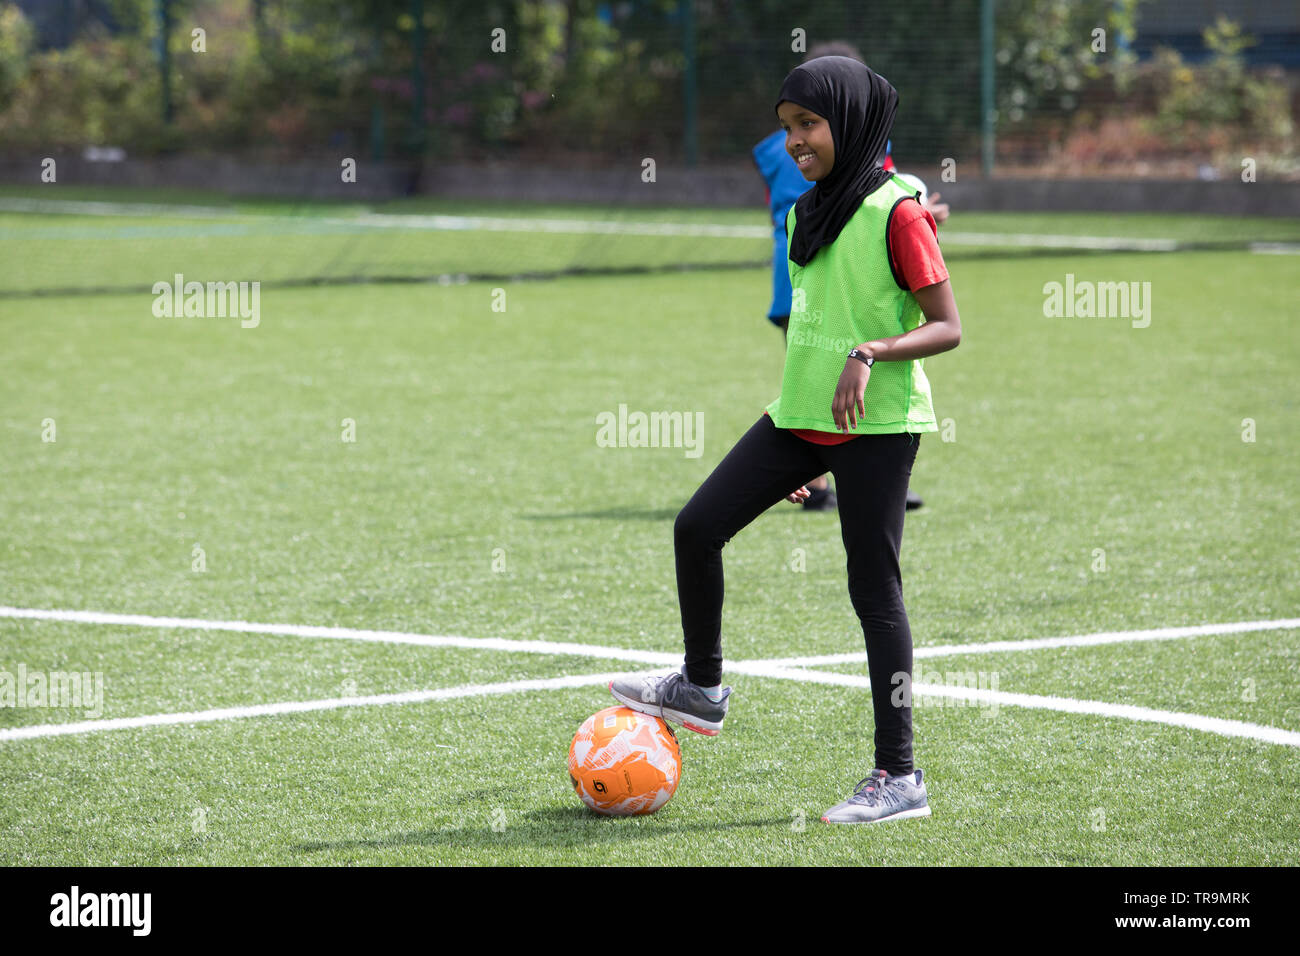 Muslim girl playing football on an astroturf training pitch. Wearing hijab (headscarves). Stock Photo